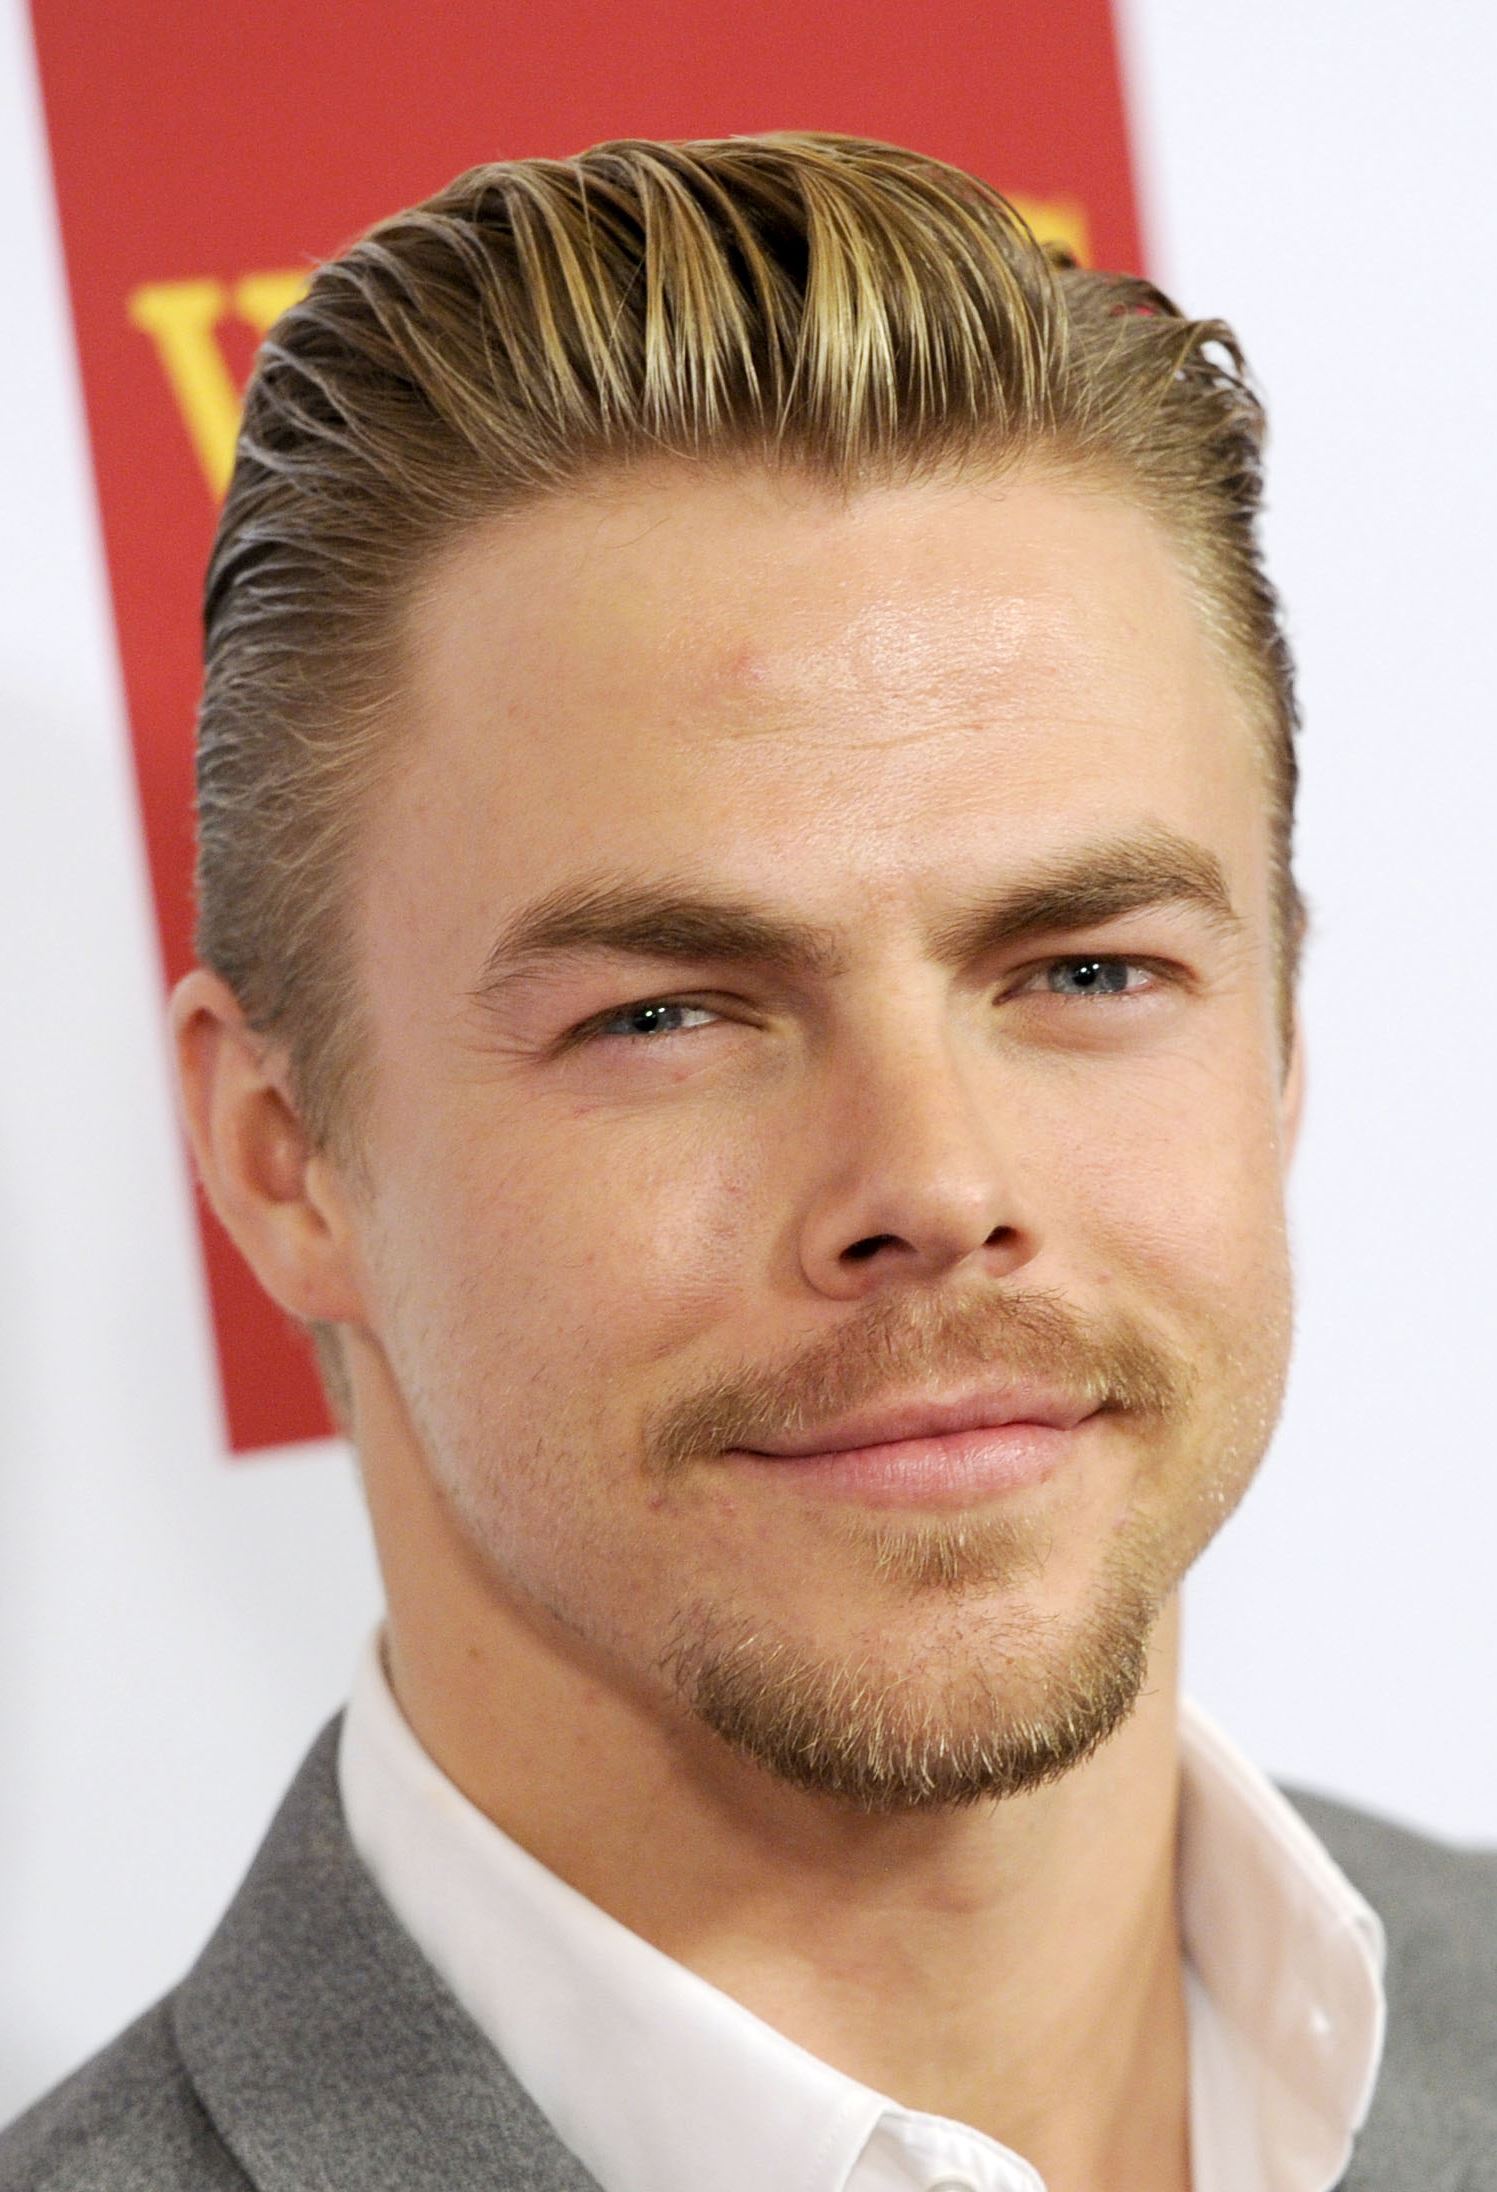 Derek Hough says he's being careful after 'Dancing' injuries The Blade